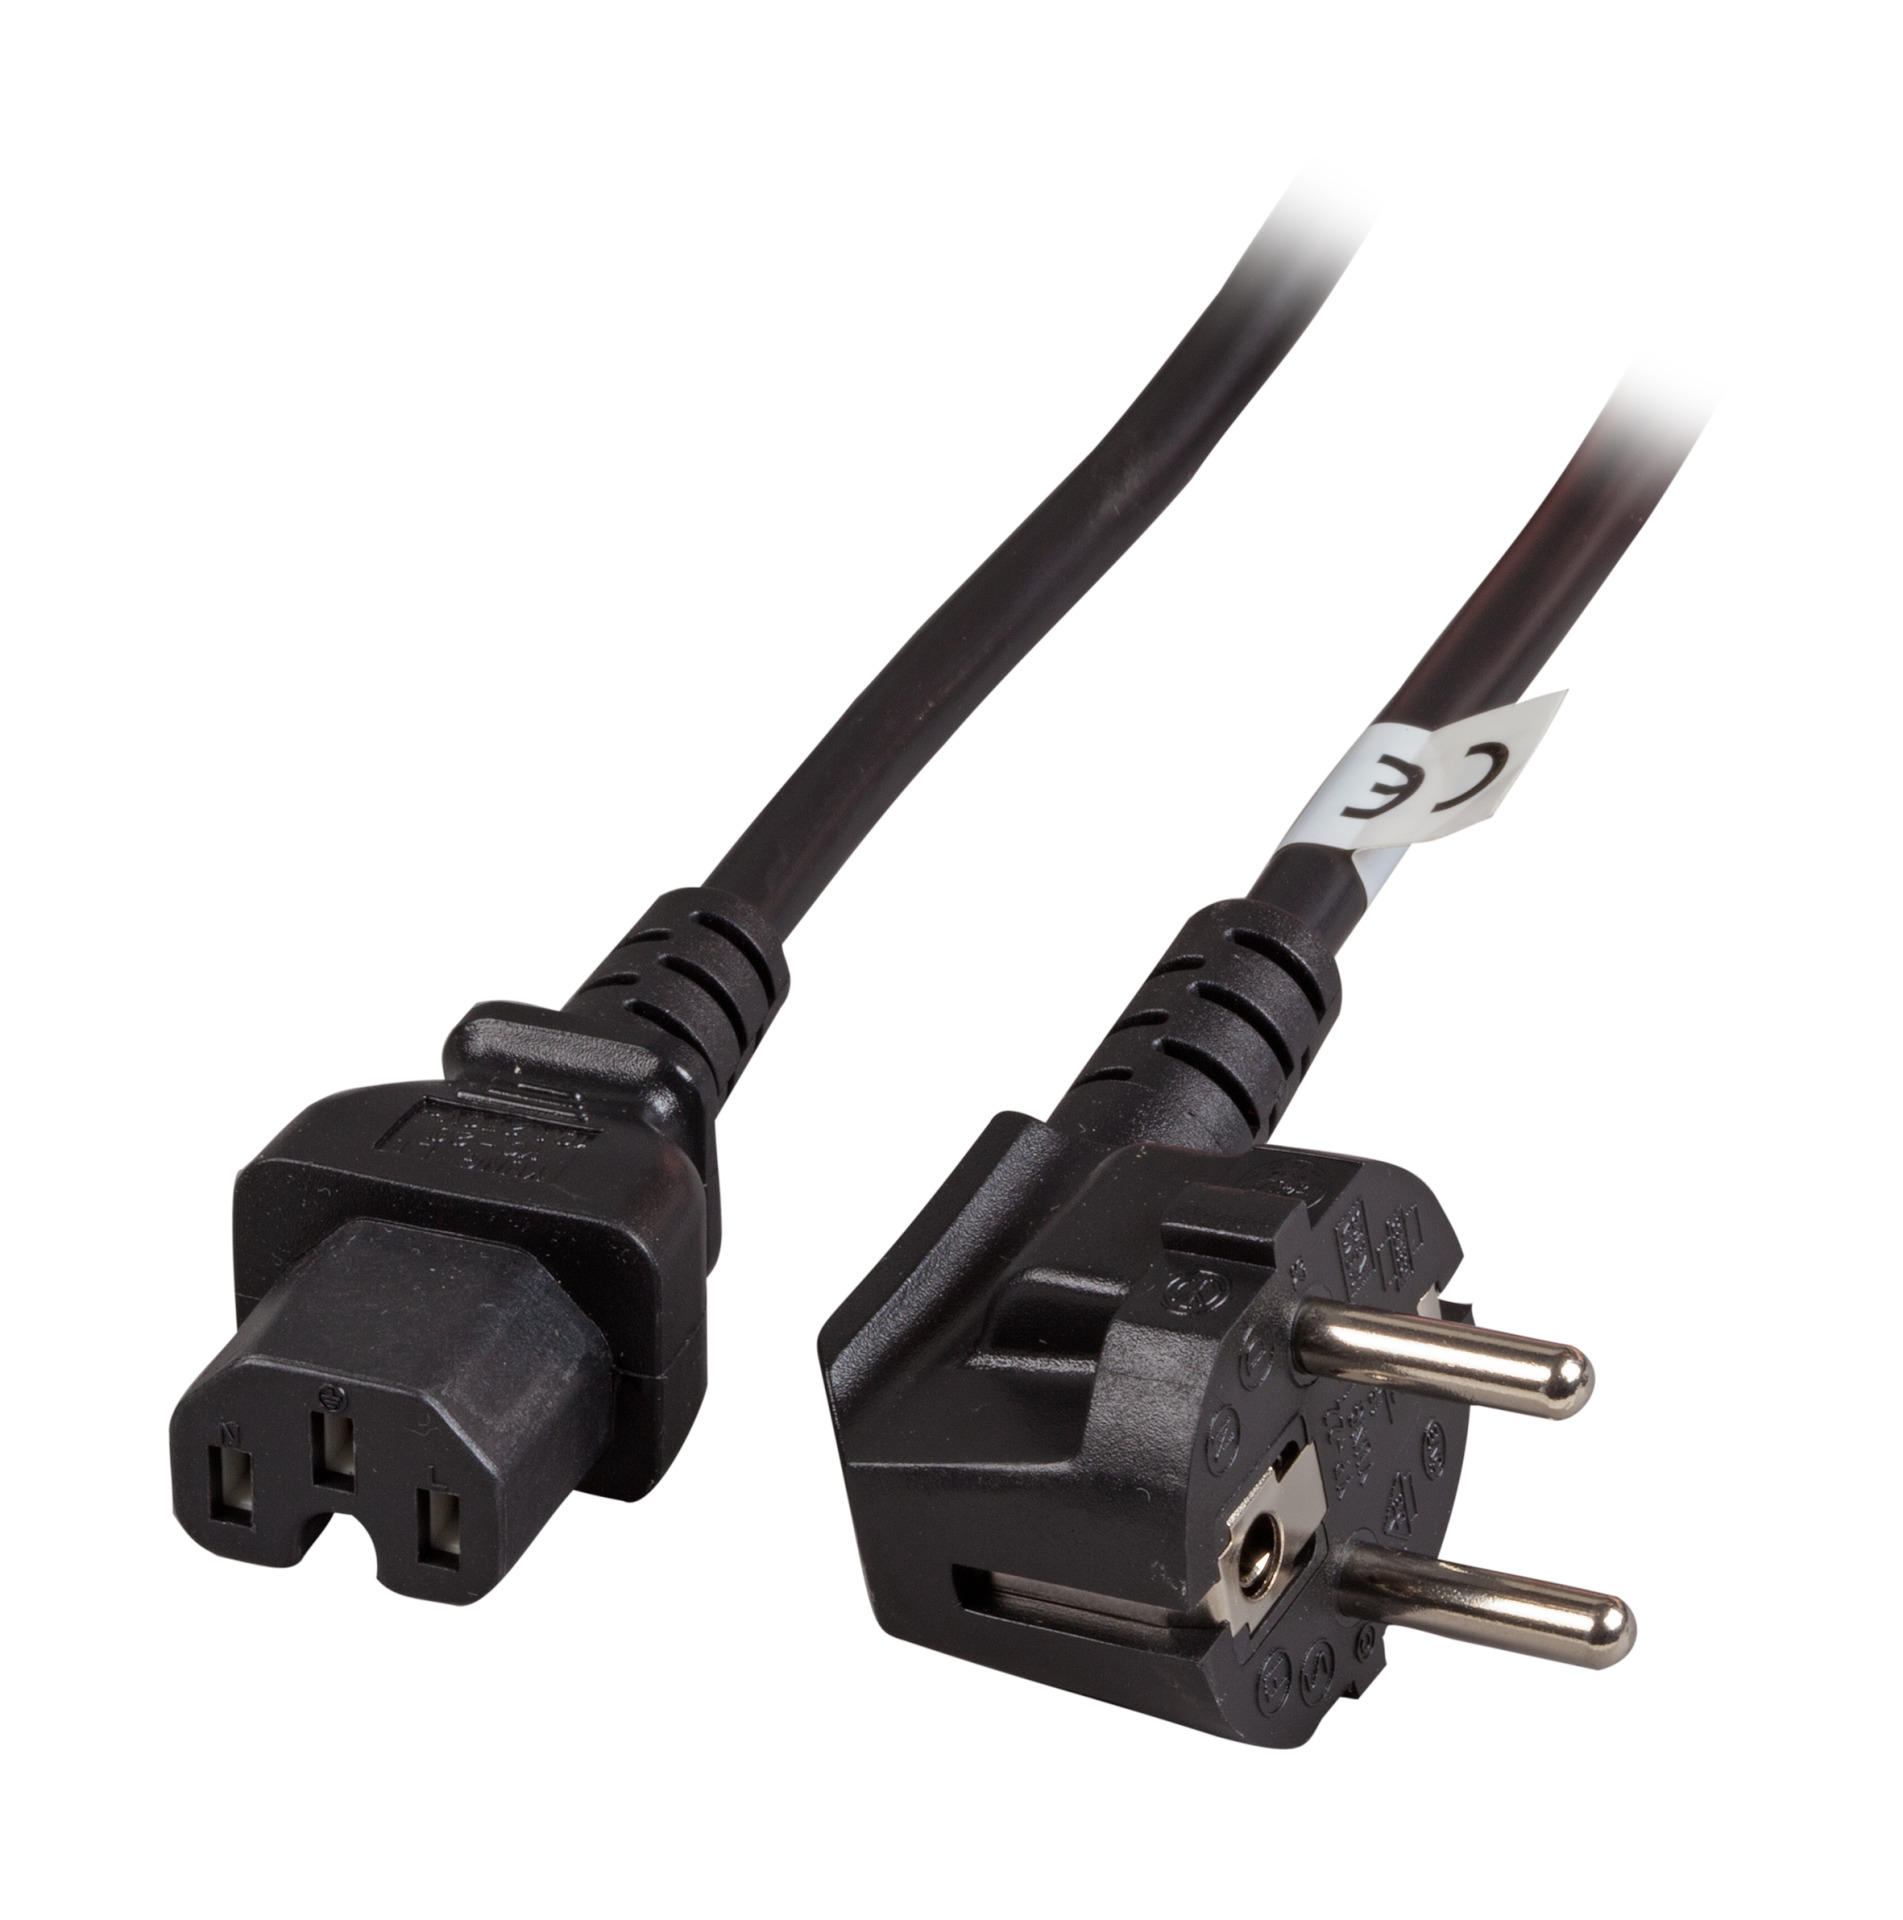 Warm Device Cable CEE 7/7 90° to C15, Black, 1 m, 3 x 1.00 mm²